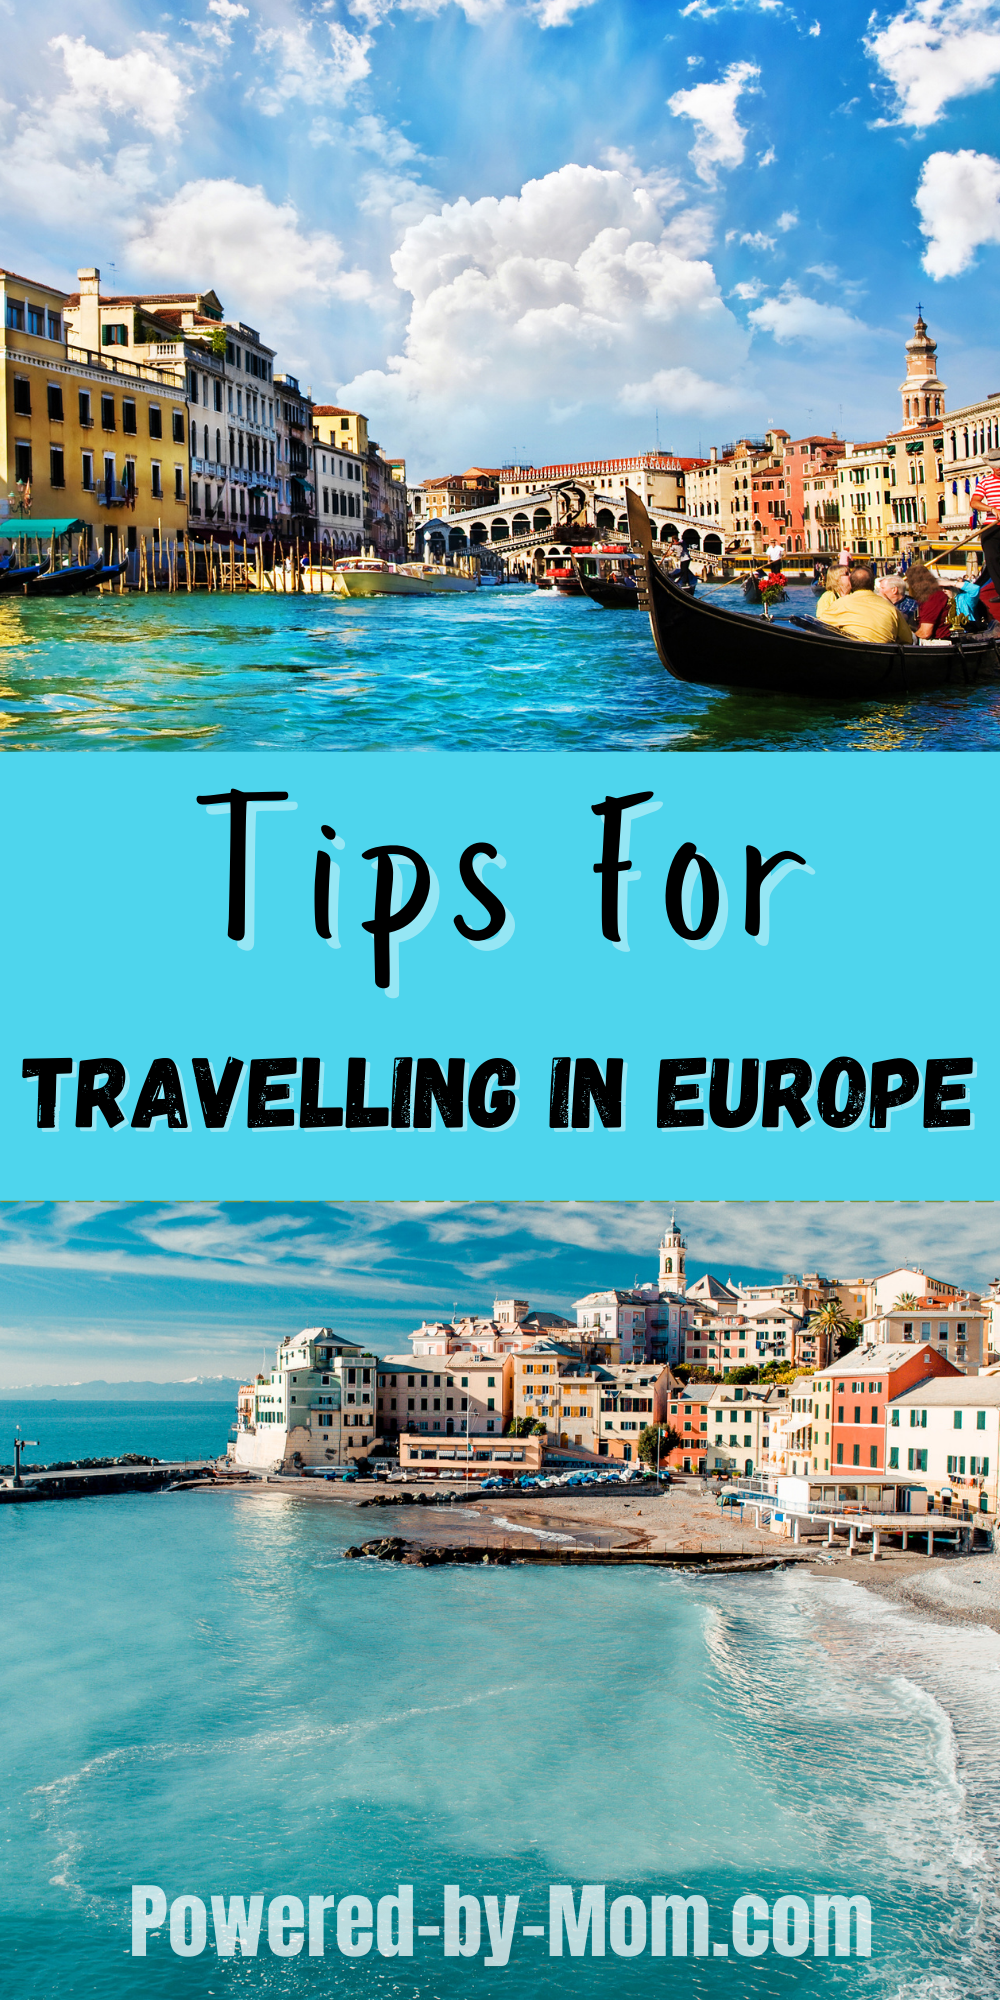 We're sharing some tips for travelling in Europe for a safe and fun trip. Many of these tips can be applied to anywhere you travel.